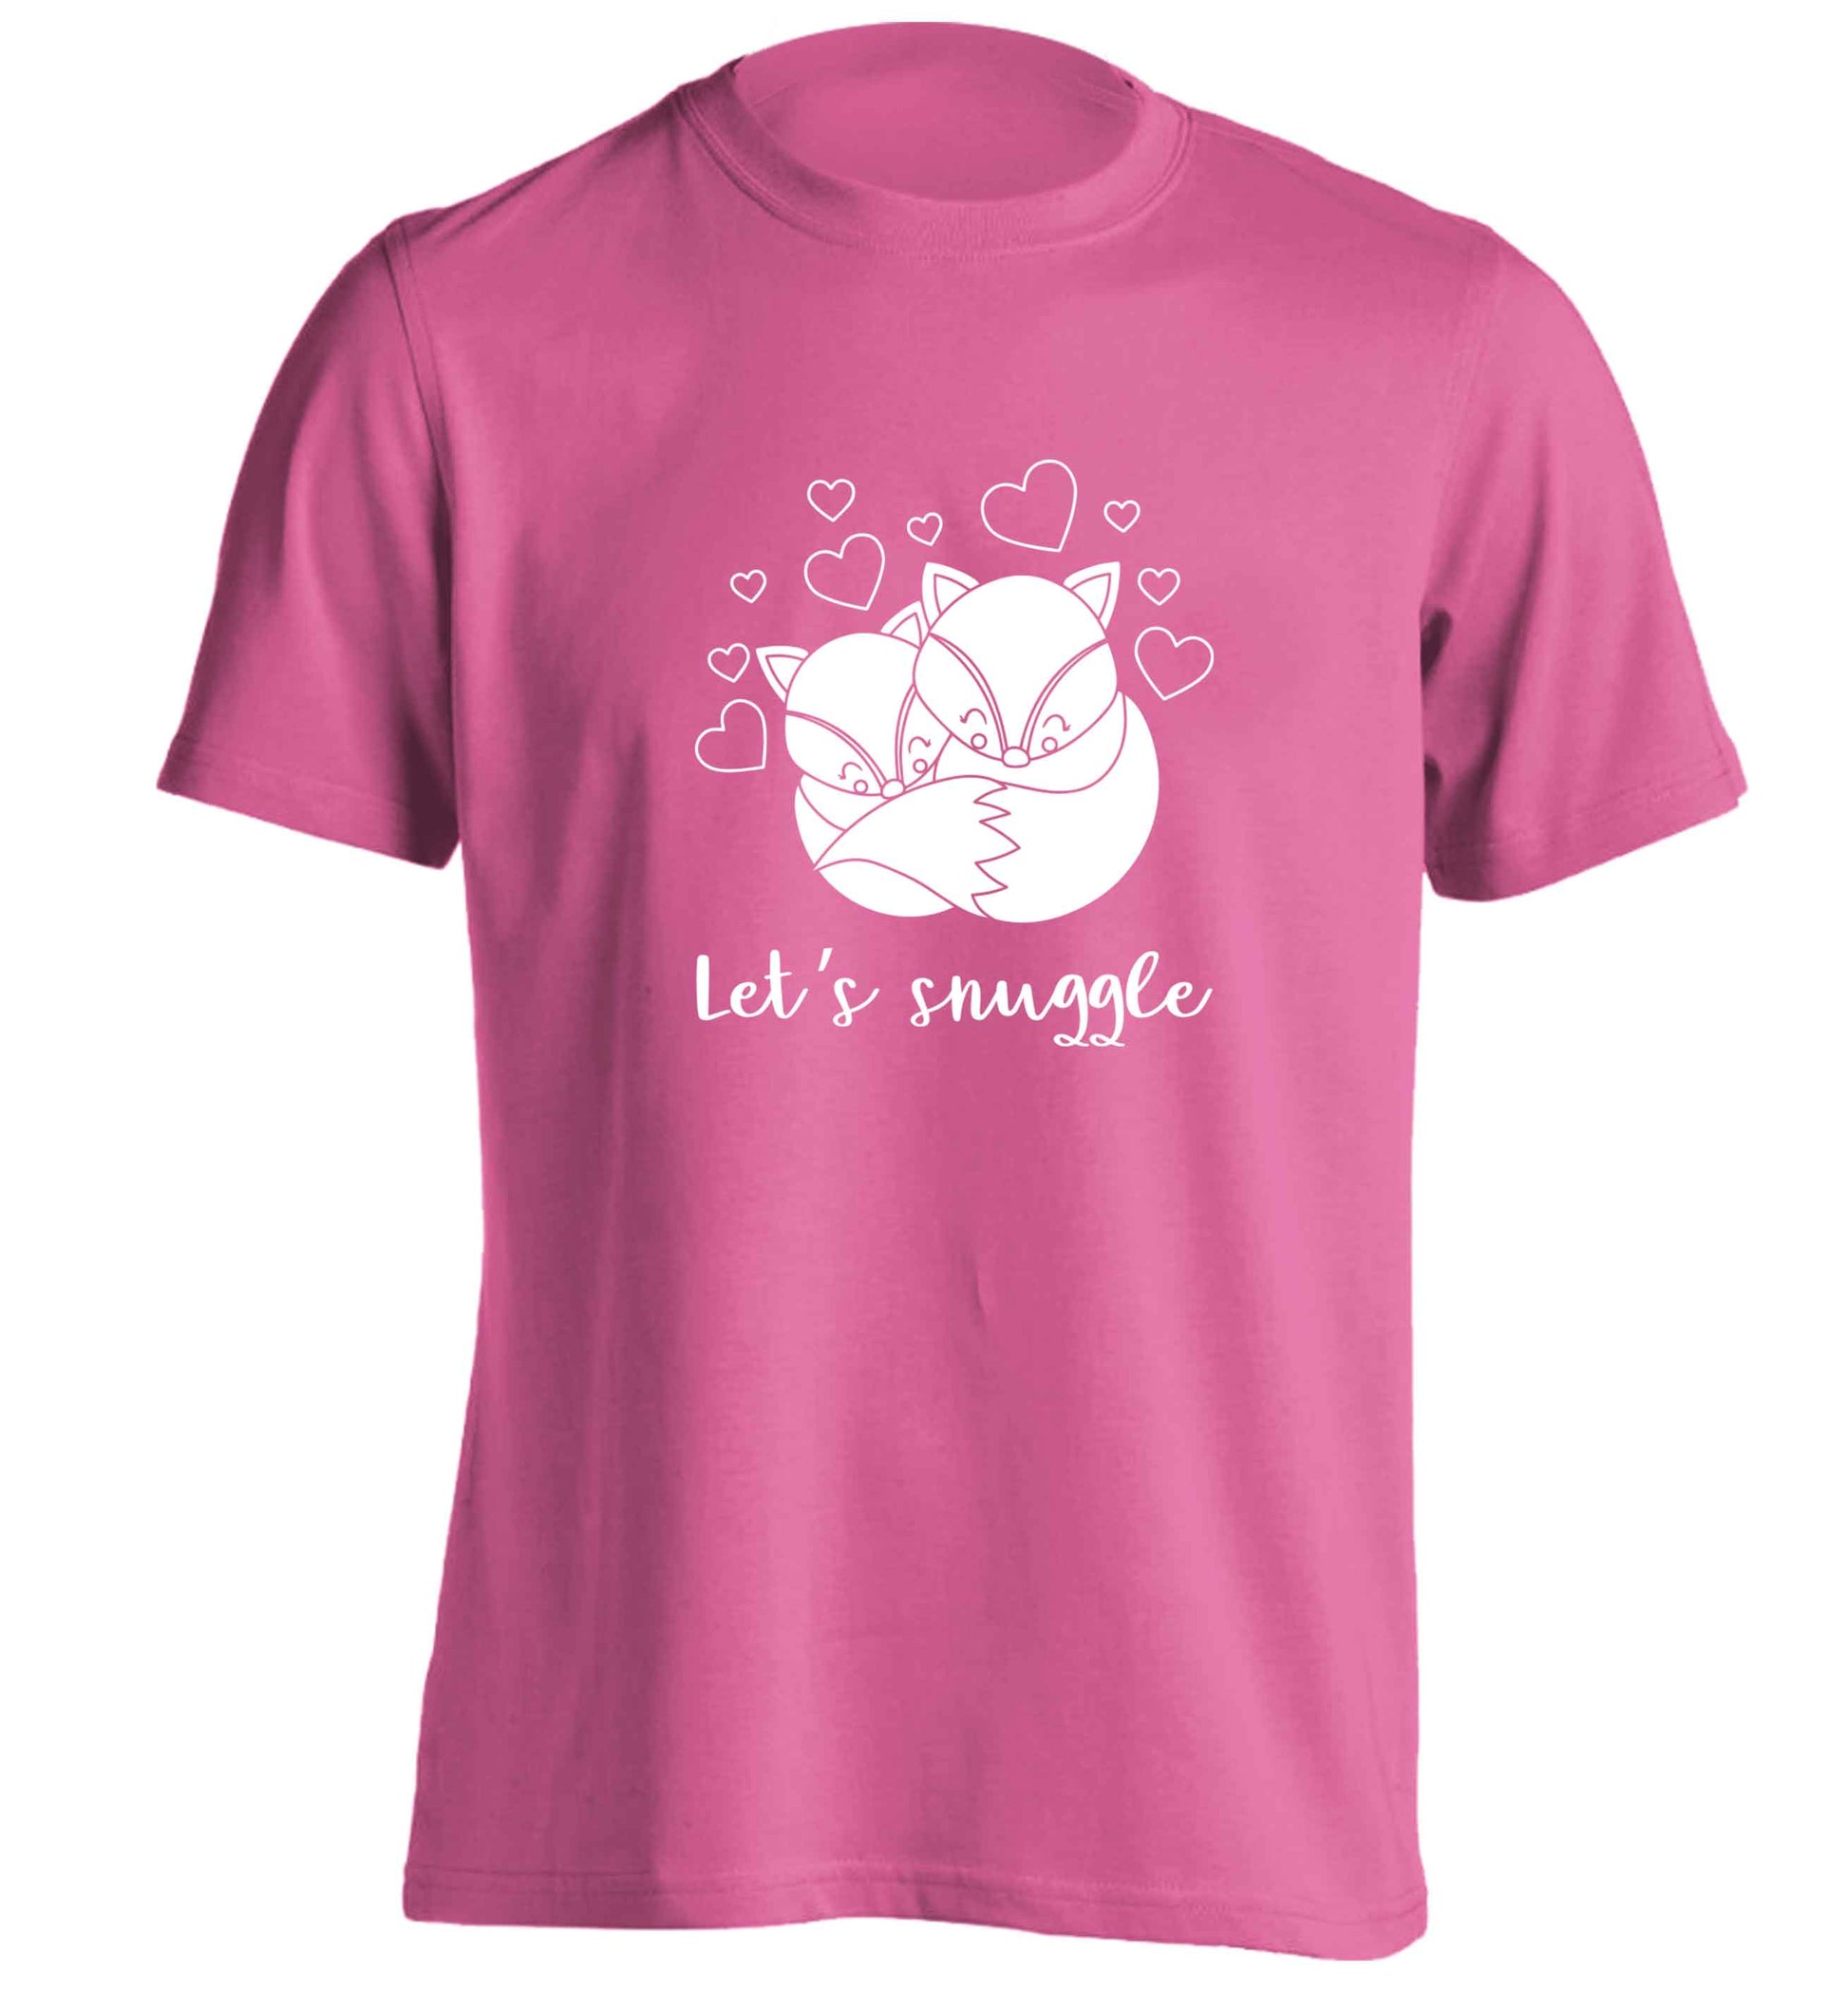 Let's snuggle adults unisex pink Tshirt 2XL